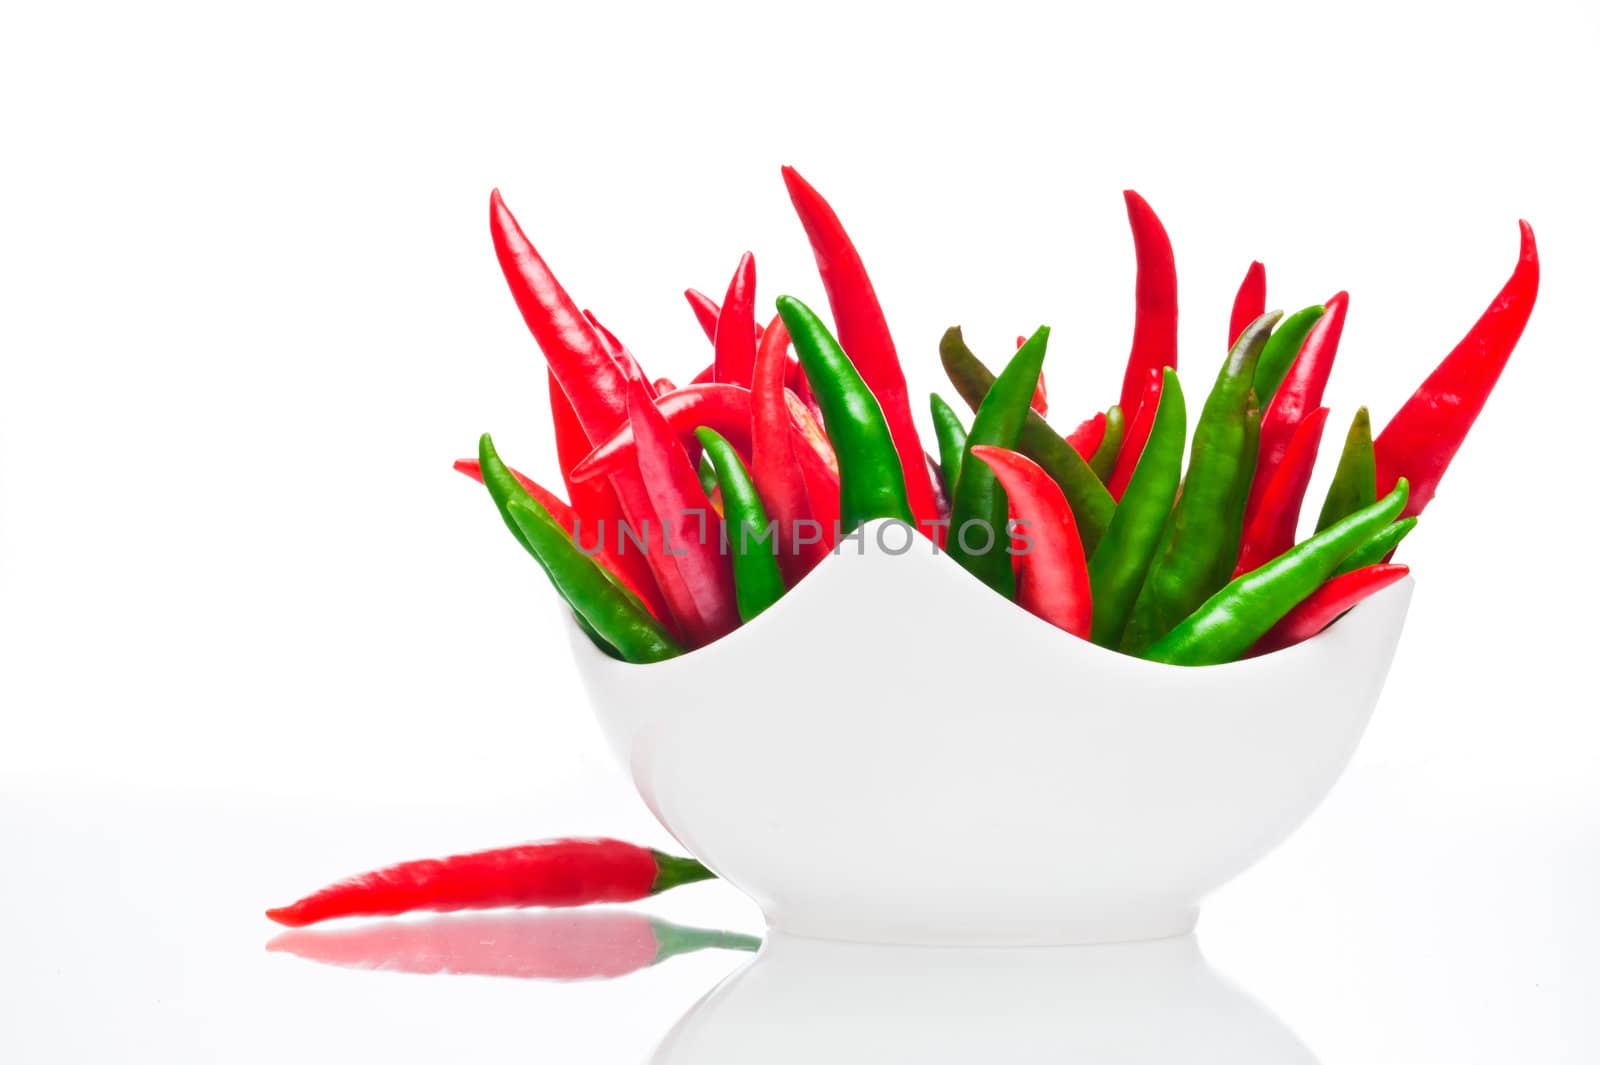 Chili in a bowl on a white background by p.studio66